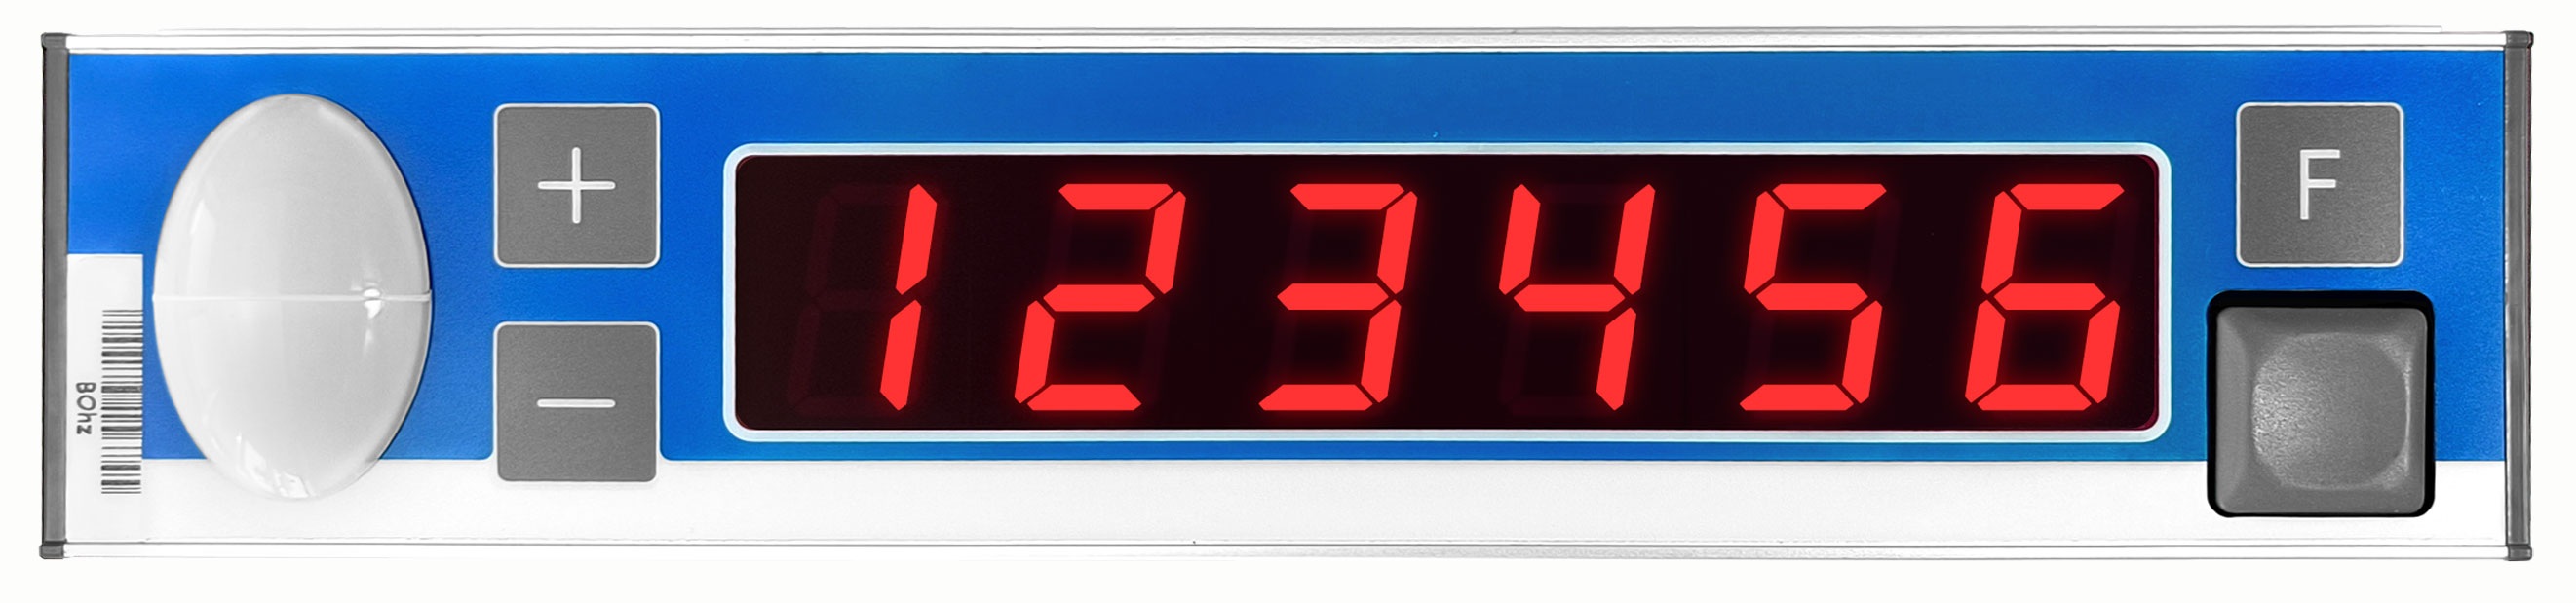 pick to light module with 6 digit display